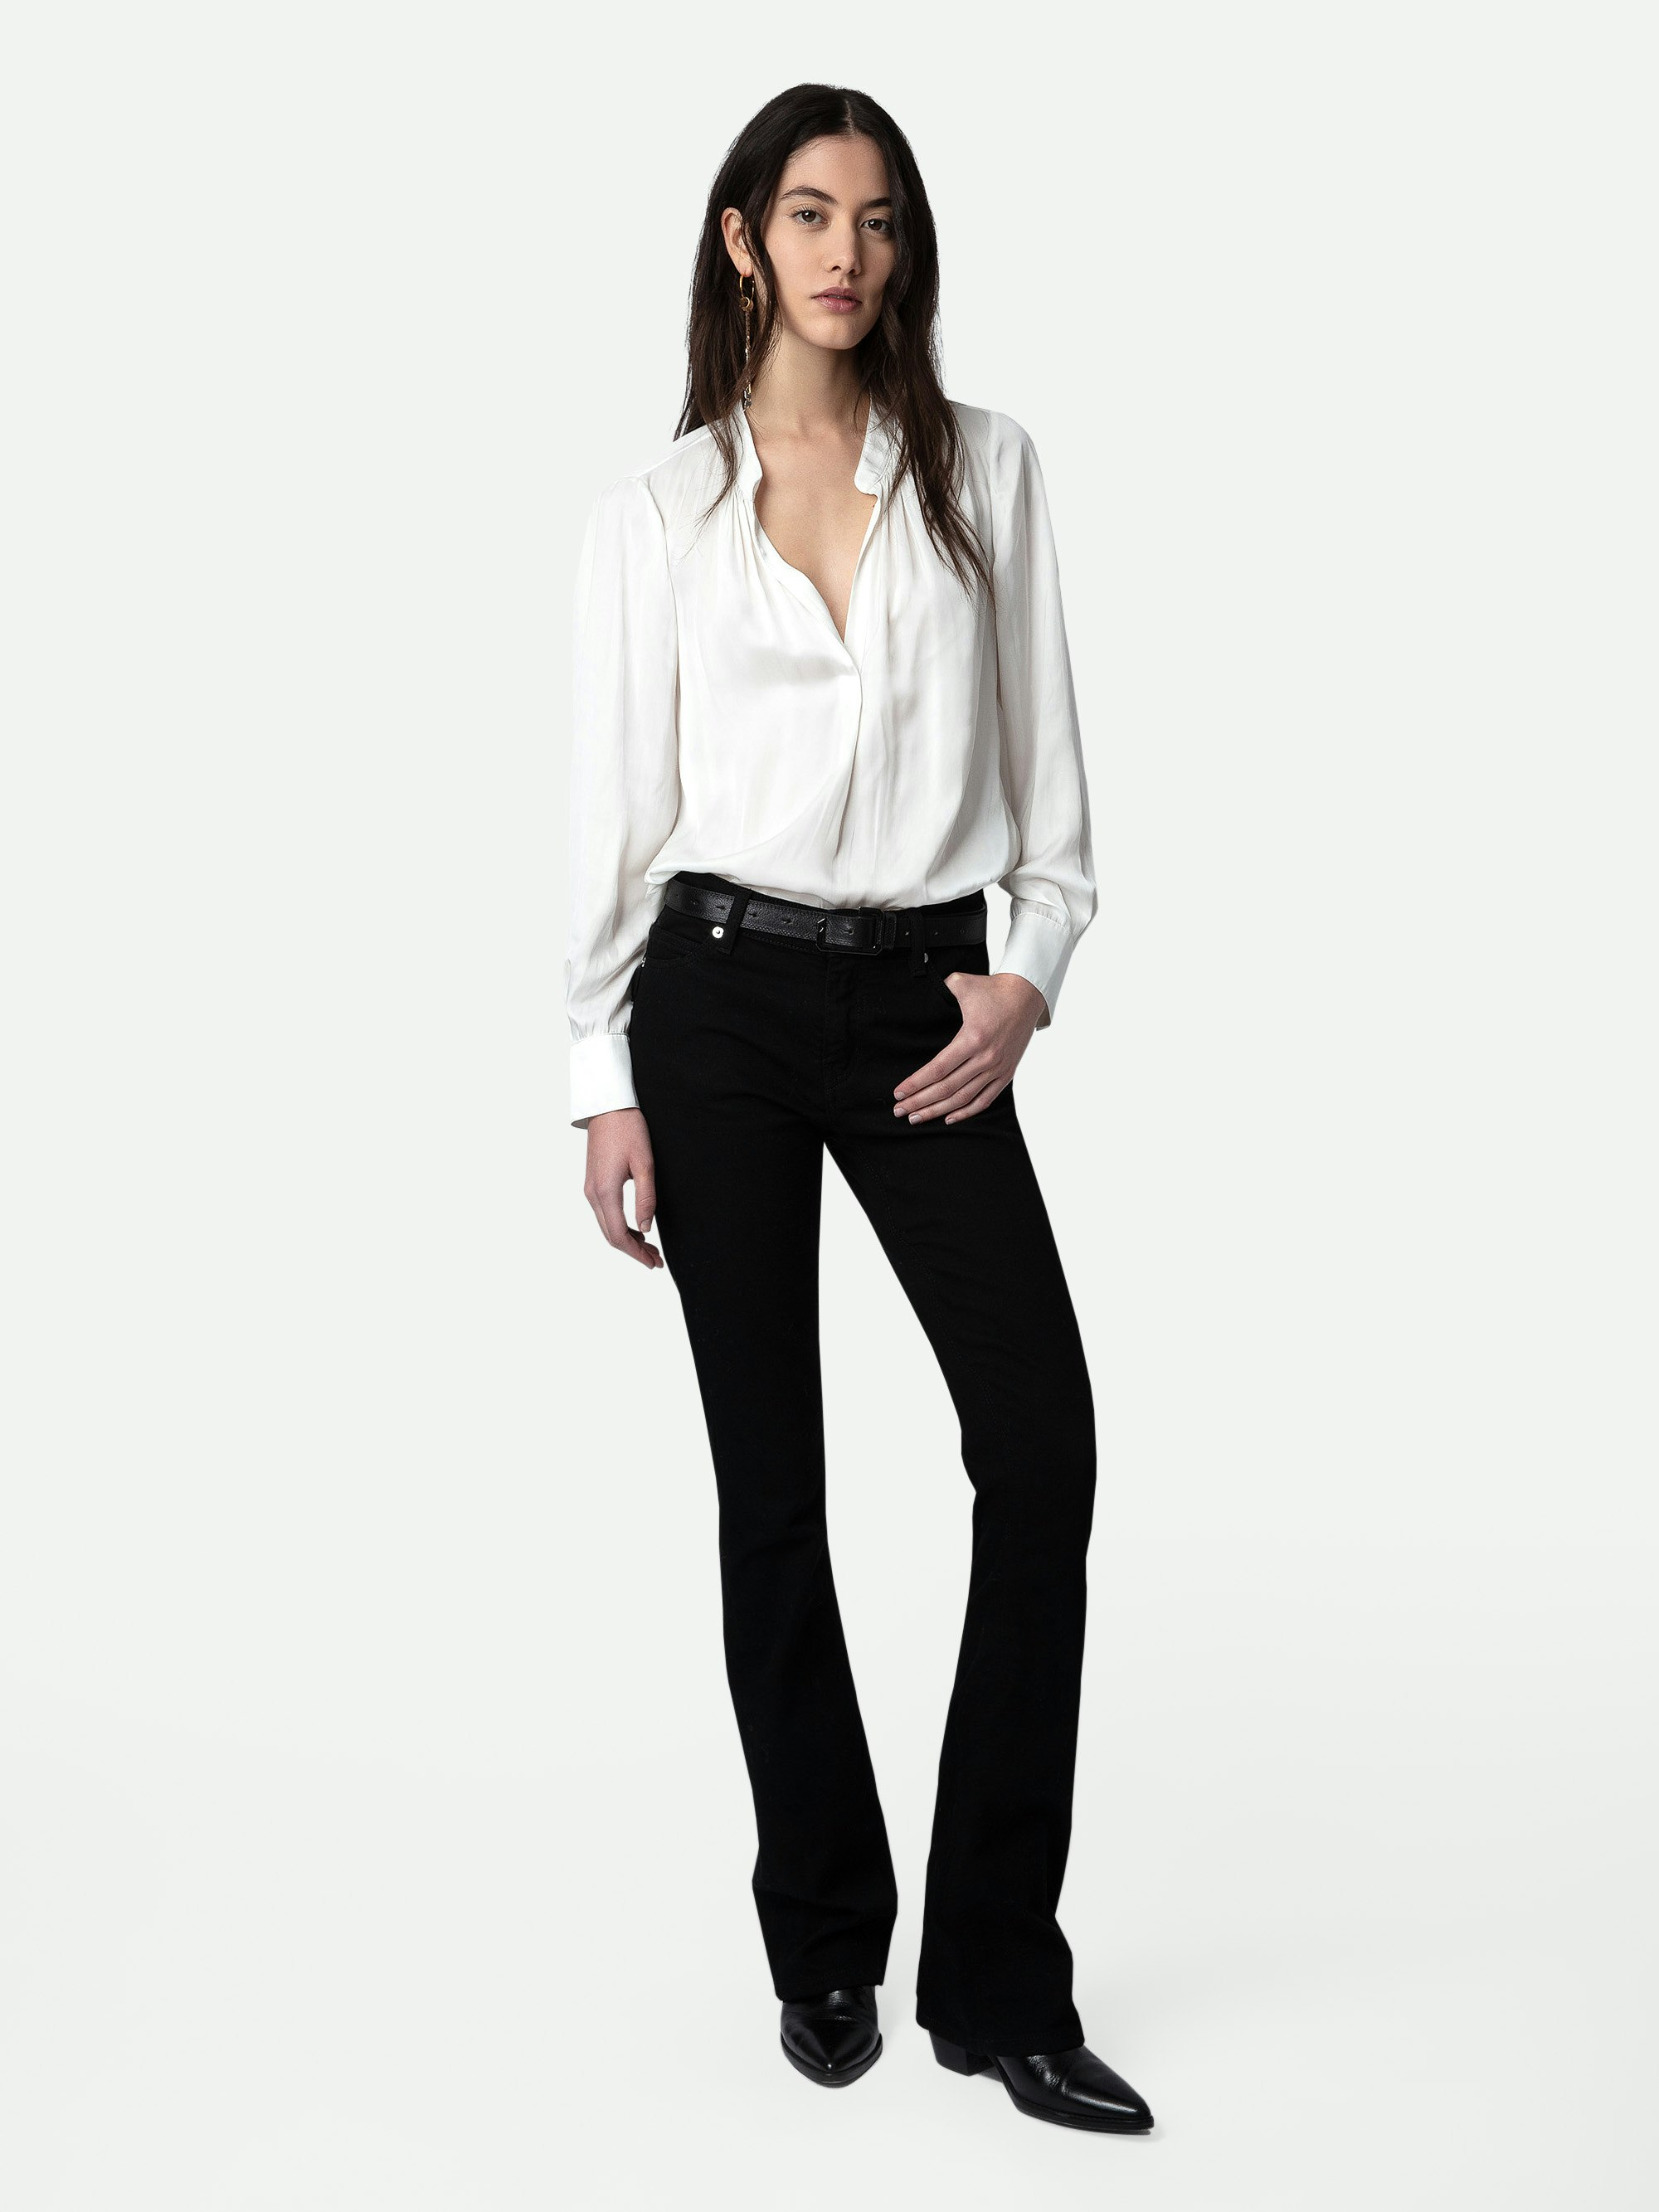 Tink Satin Tunic - Zadig&Voltaire women's white top.